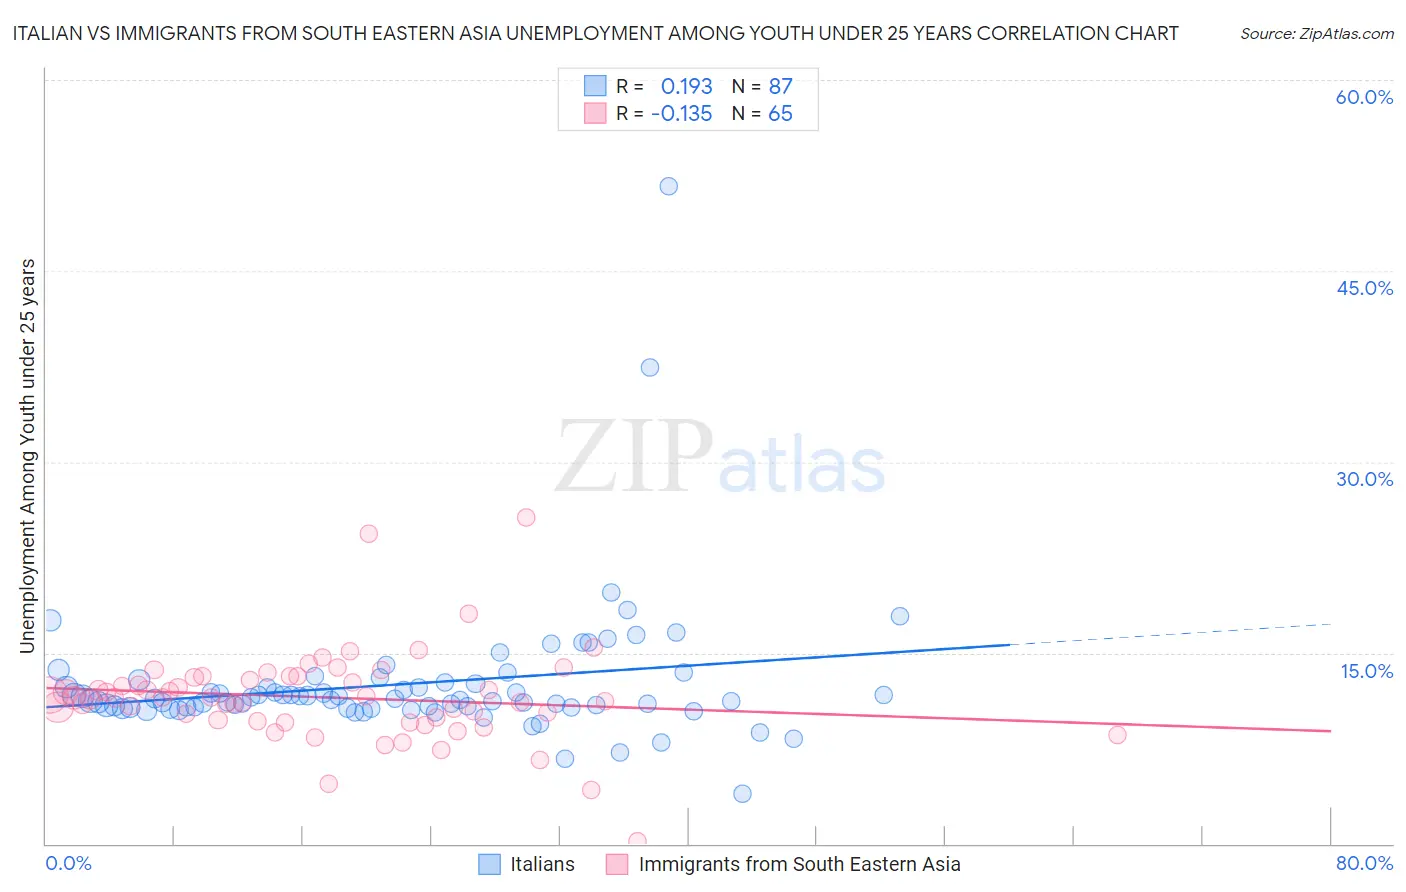 Italian vs Immigrants from South Eastern Asia Unemployment Among Youth under 25 years